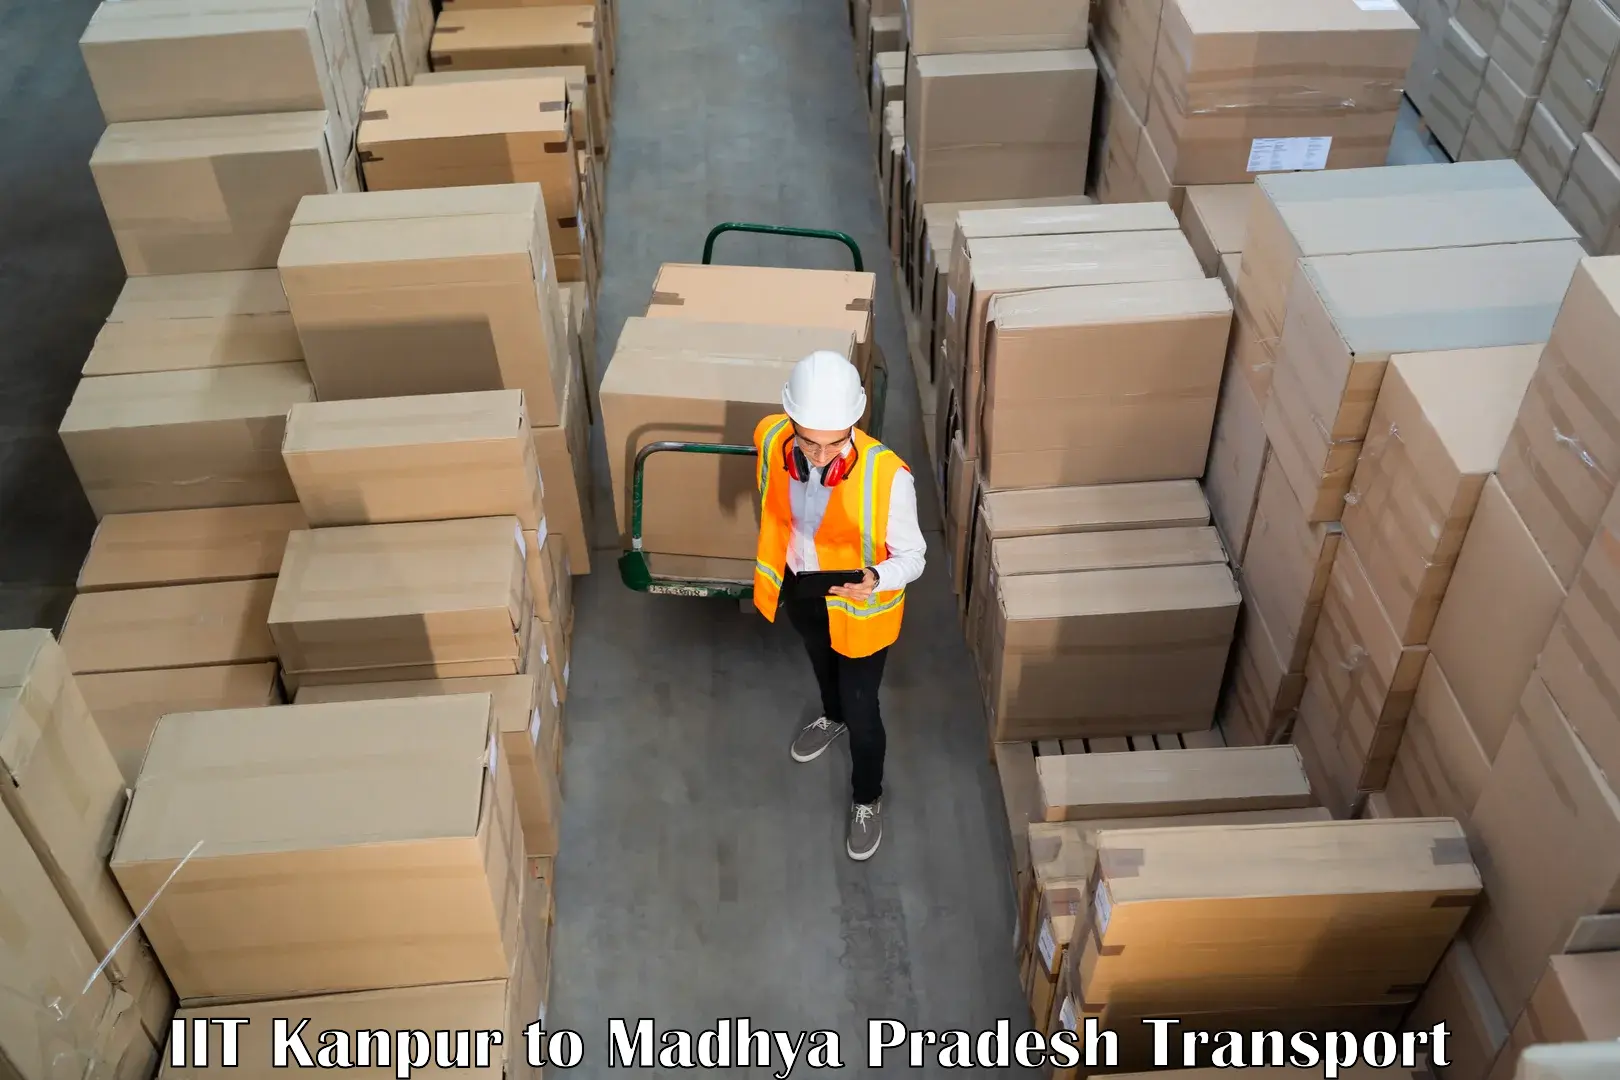 Furniture transport service IIT Kanpur to Sehore